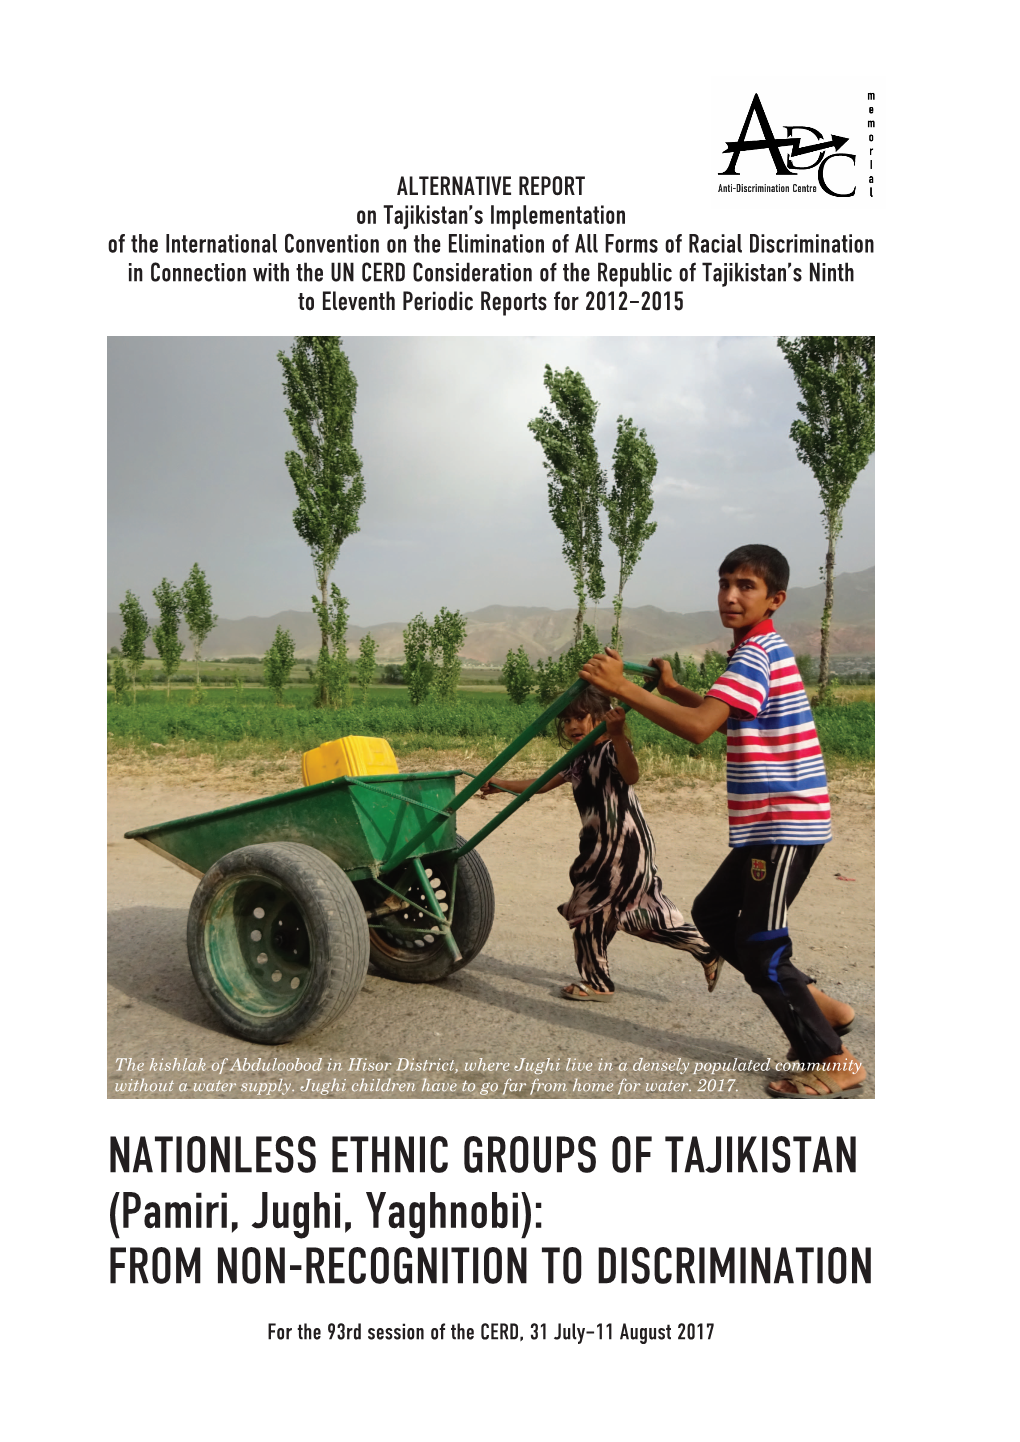 Nationless Ethnic Groups of Tajikistan (Pamiri, Jughi, Yaghnobi): from Non-Recognition to Discrimination